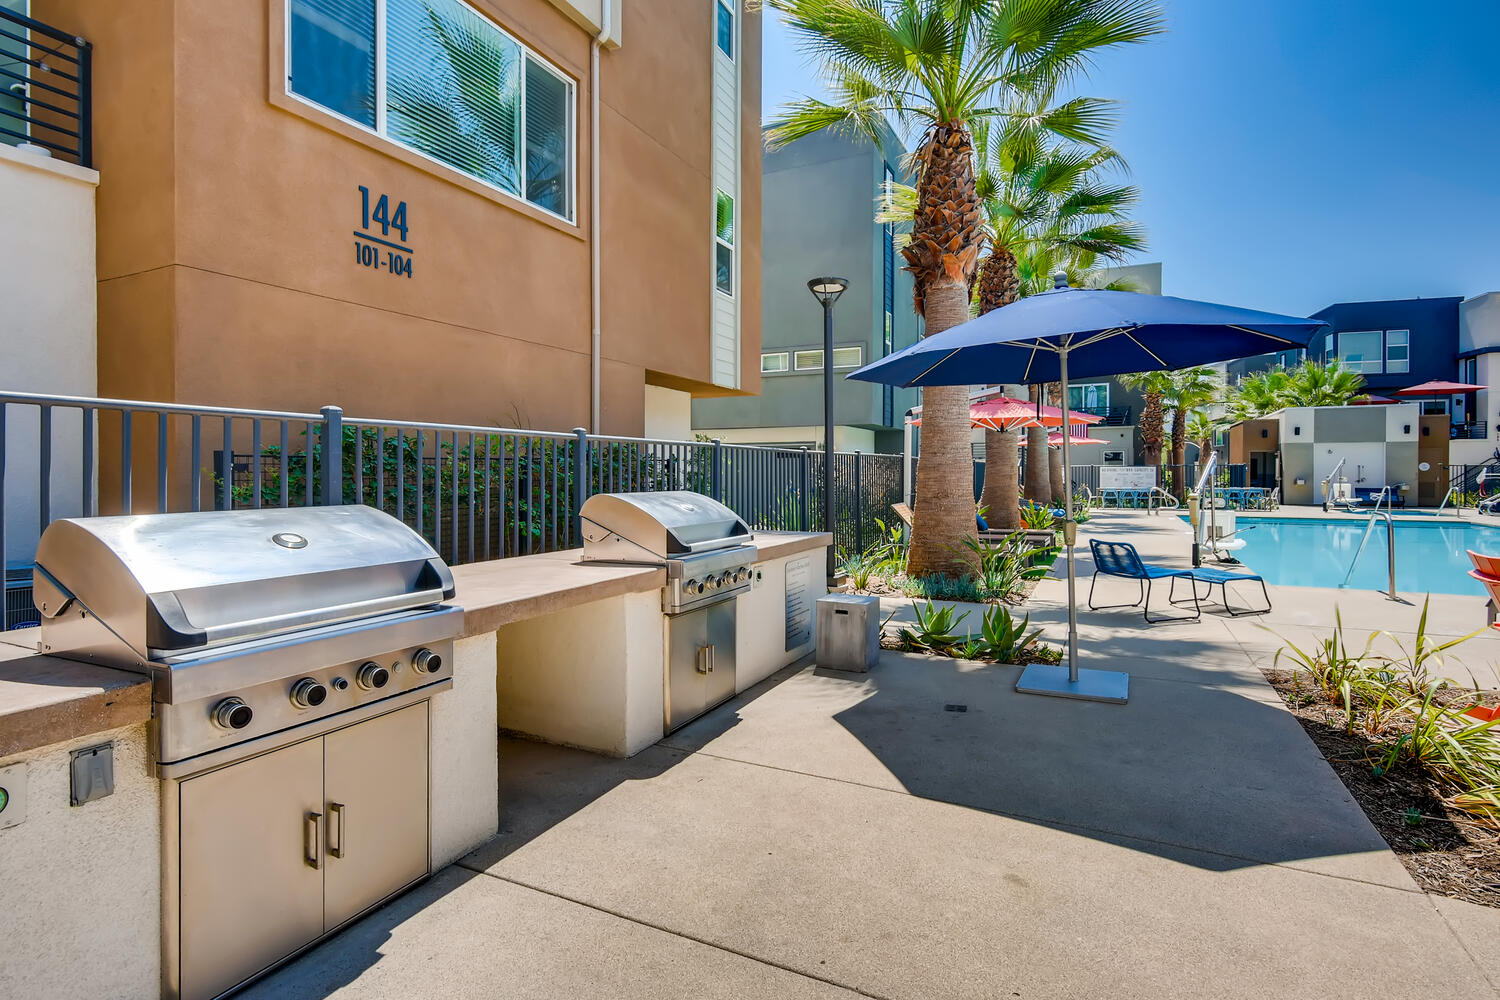 Outdoor pool area in a residential complex with stainless steel grills, a blue umbrella, and a black metal fence.